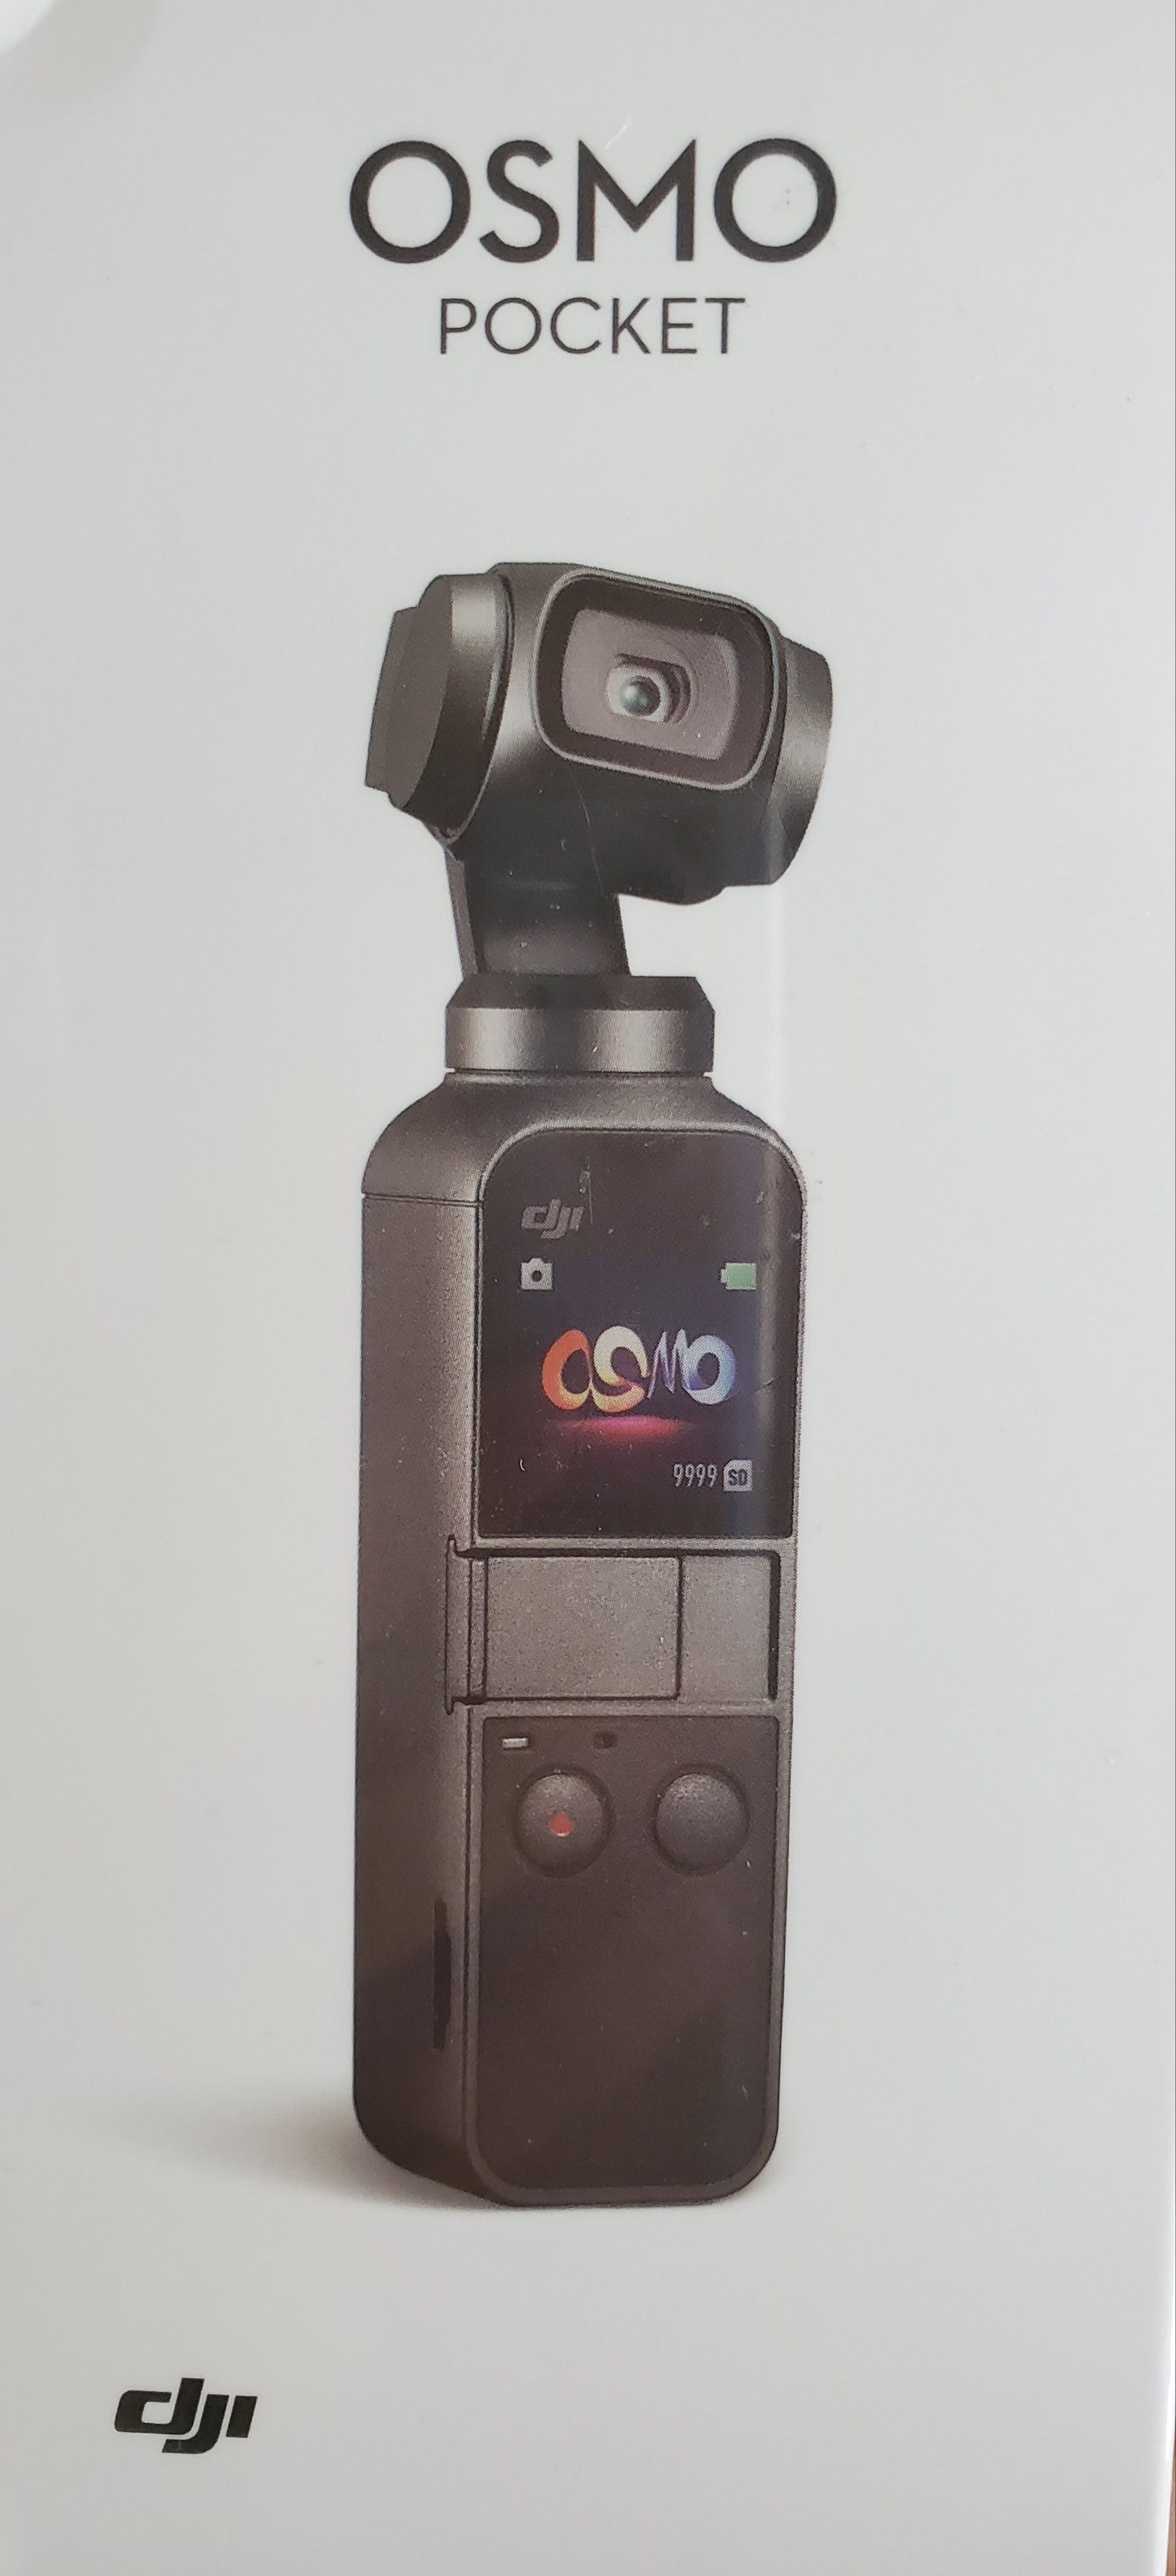 New DJI Osmo Pocket - Handheld 3-Axis Gimbal Stabilizer with integrated Camera 12 MP 1/2.3” CMOS 4K Video